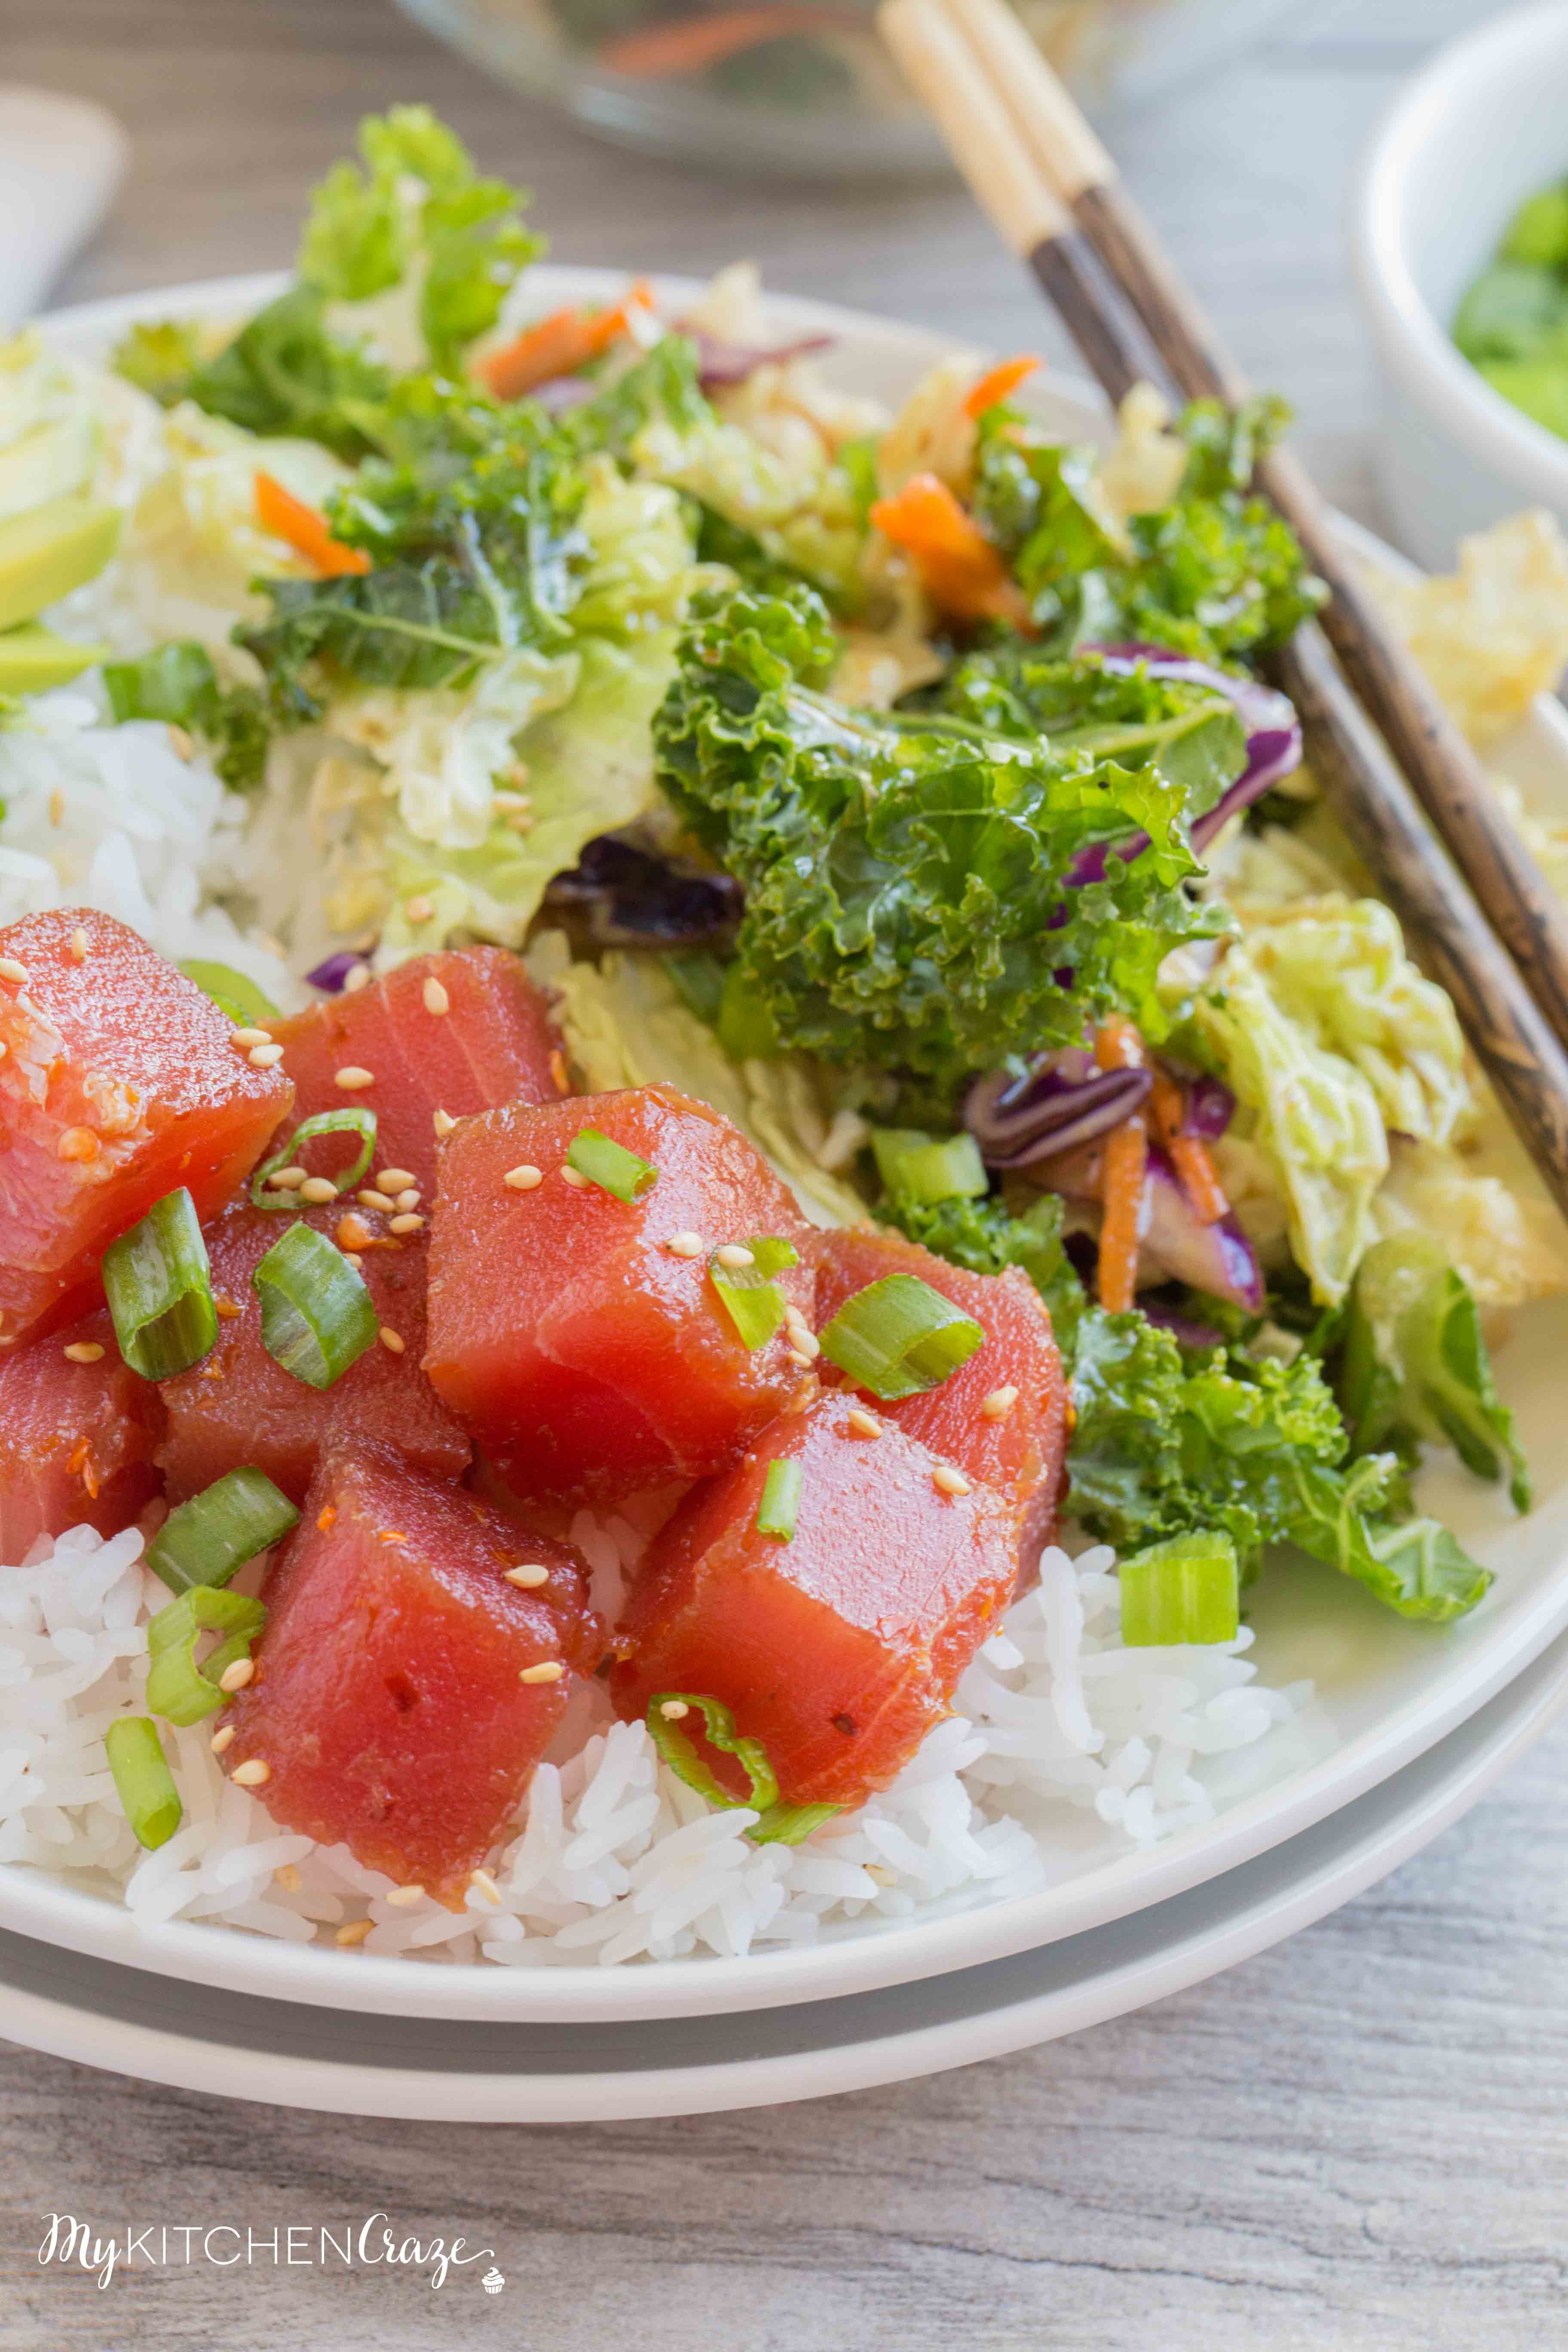 Ahi Tuna Poke Bowls ~ mykitchencraze.com ~ Ahi Tuna Poke Bowls are refreshing and a delicious recipe This easy recipe is great for parties or to enjoy as a family meal.